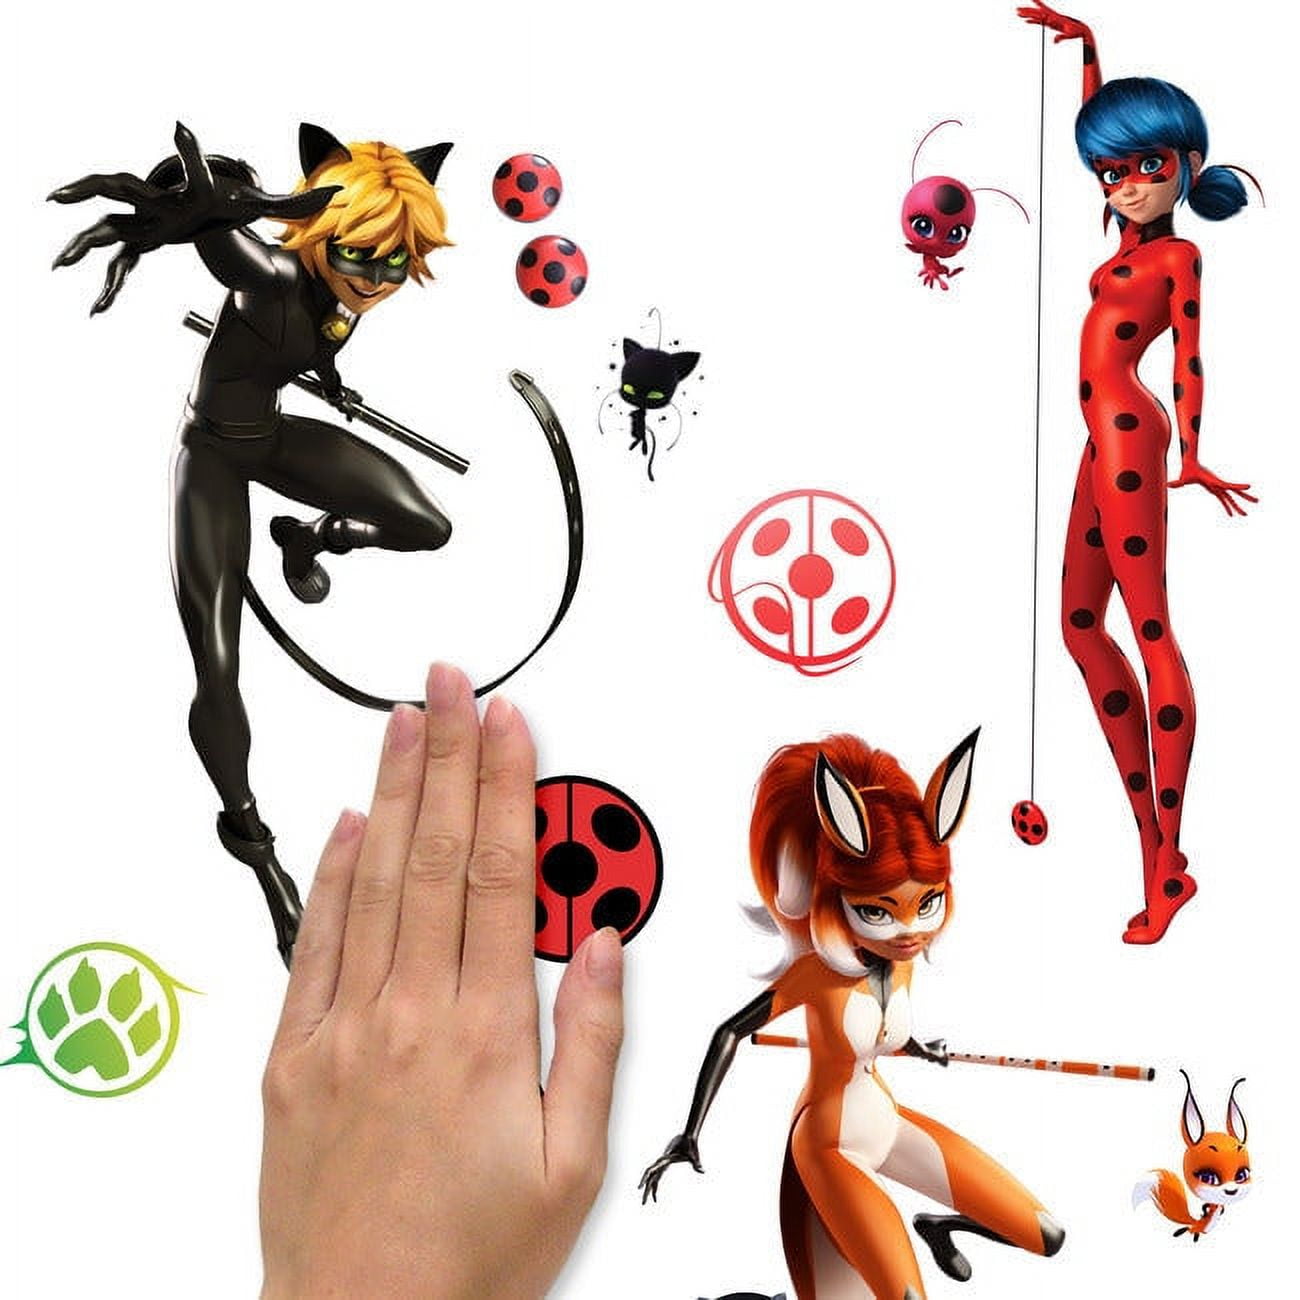 Wall Palz Miraculous Tales of Ladybug and Cat Noir 30 Peel and Stick Wall Decals - 3D Augmented Reality Interaction